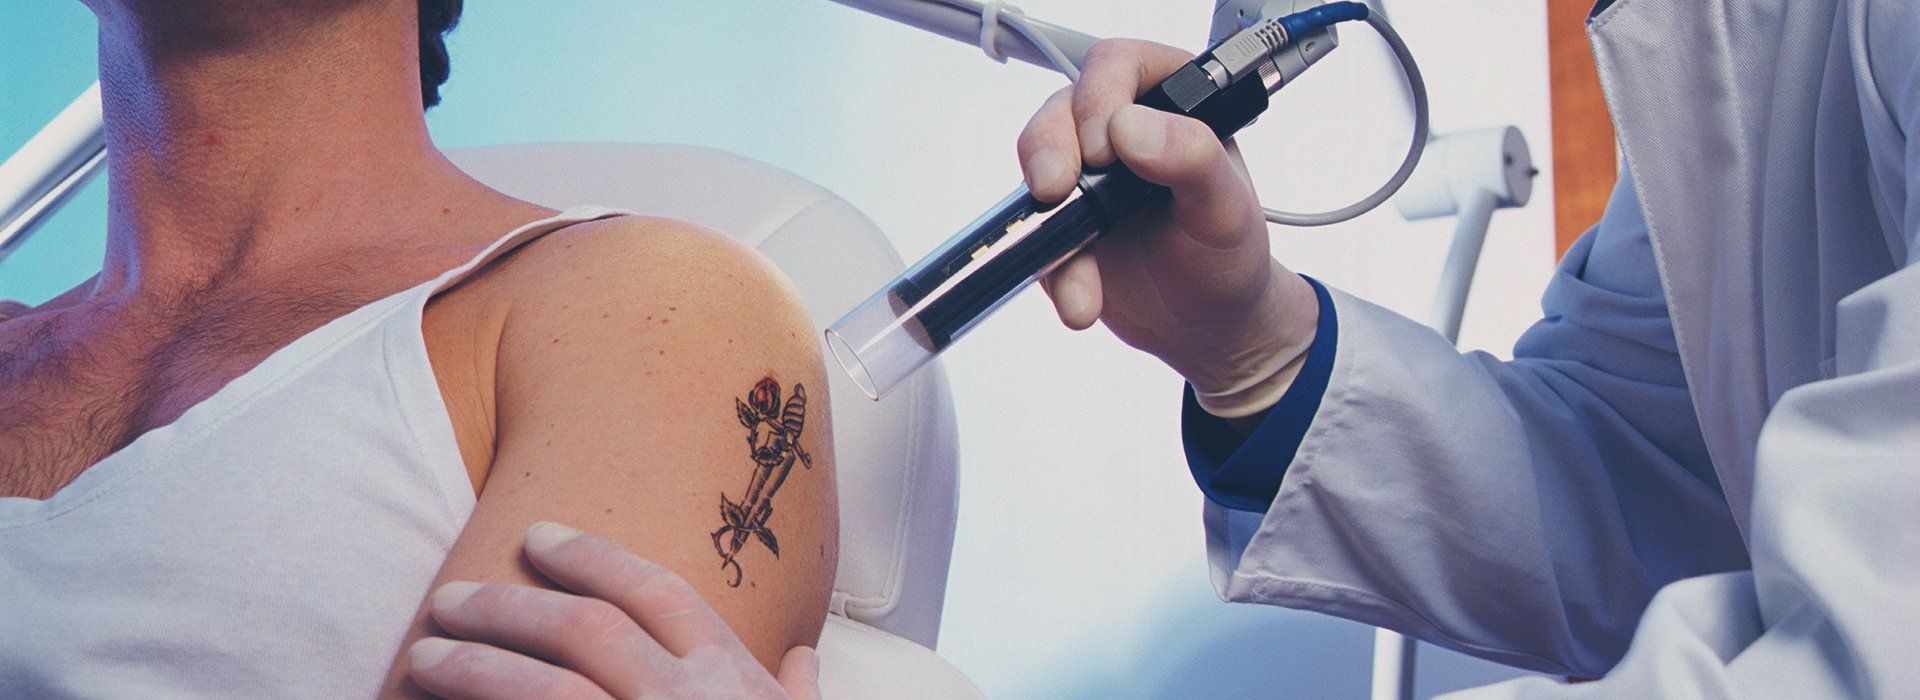 Permanent Tattoo Removal in Chennai | Pico laser tattoo removal